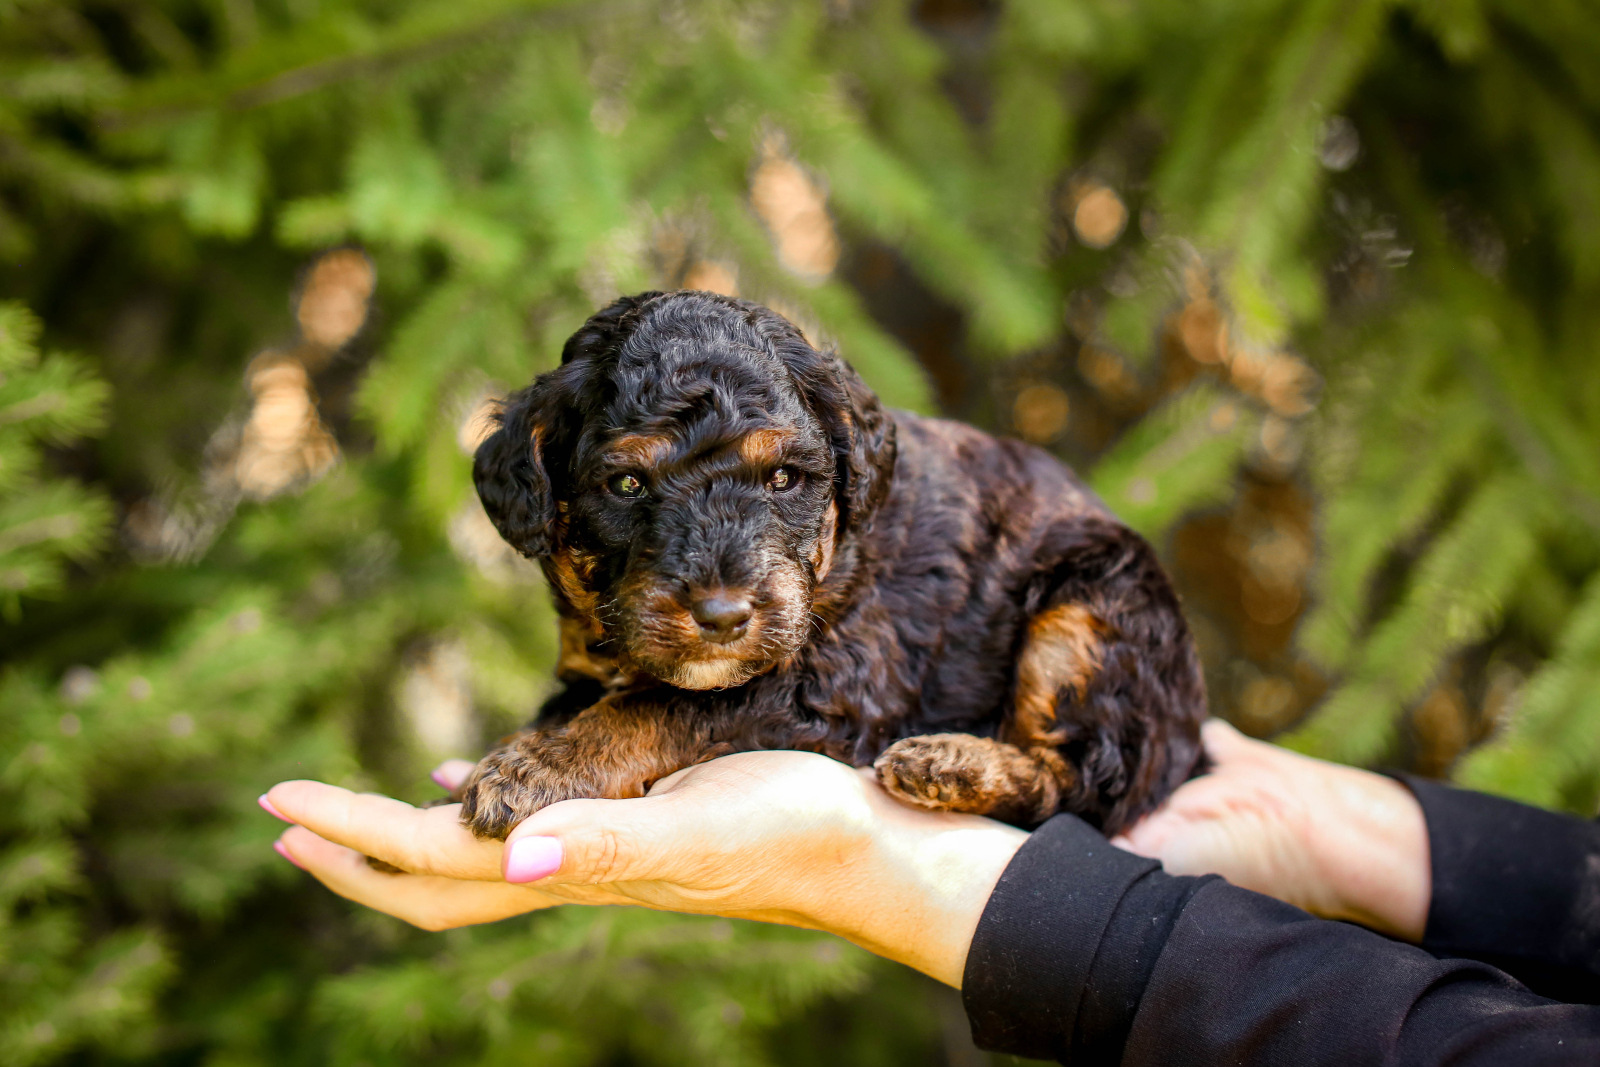 A puppy who fits in the palm of your hand